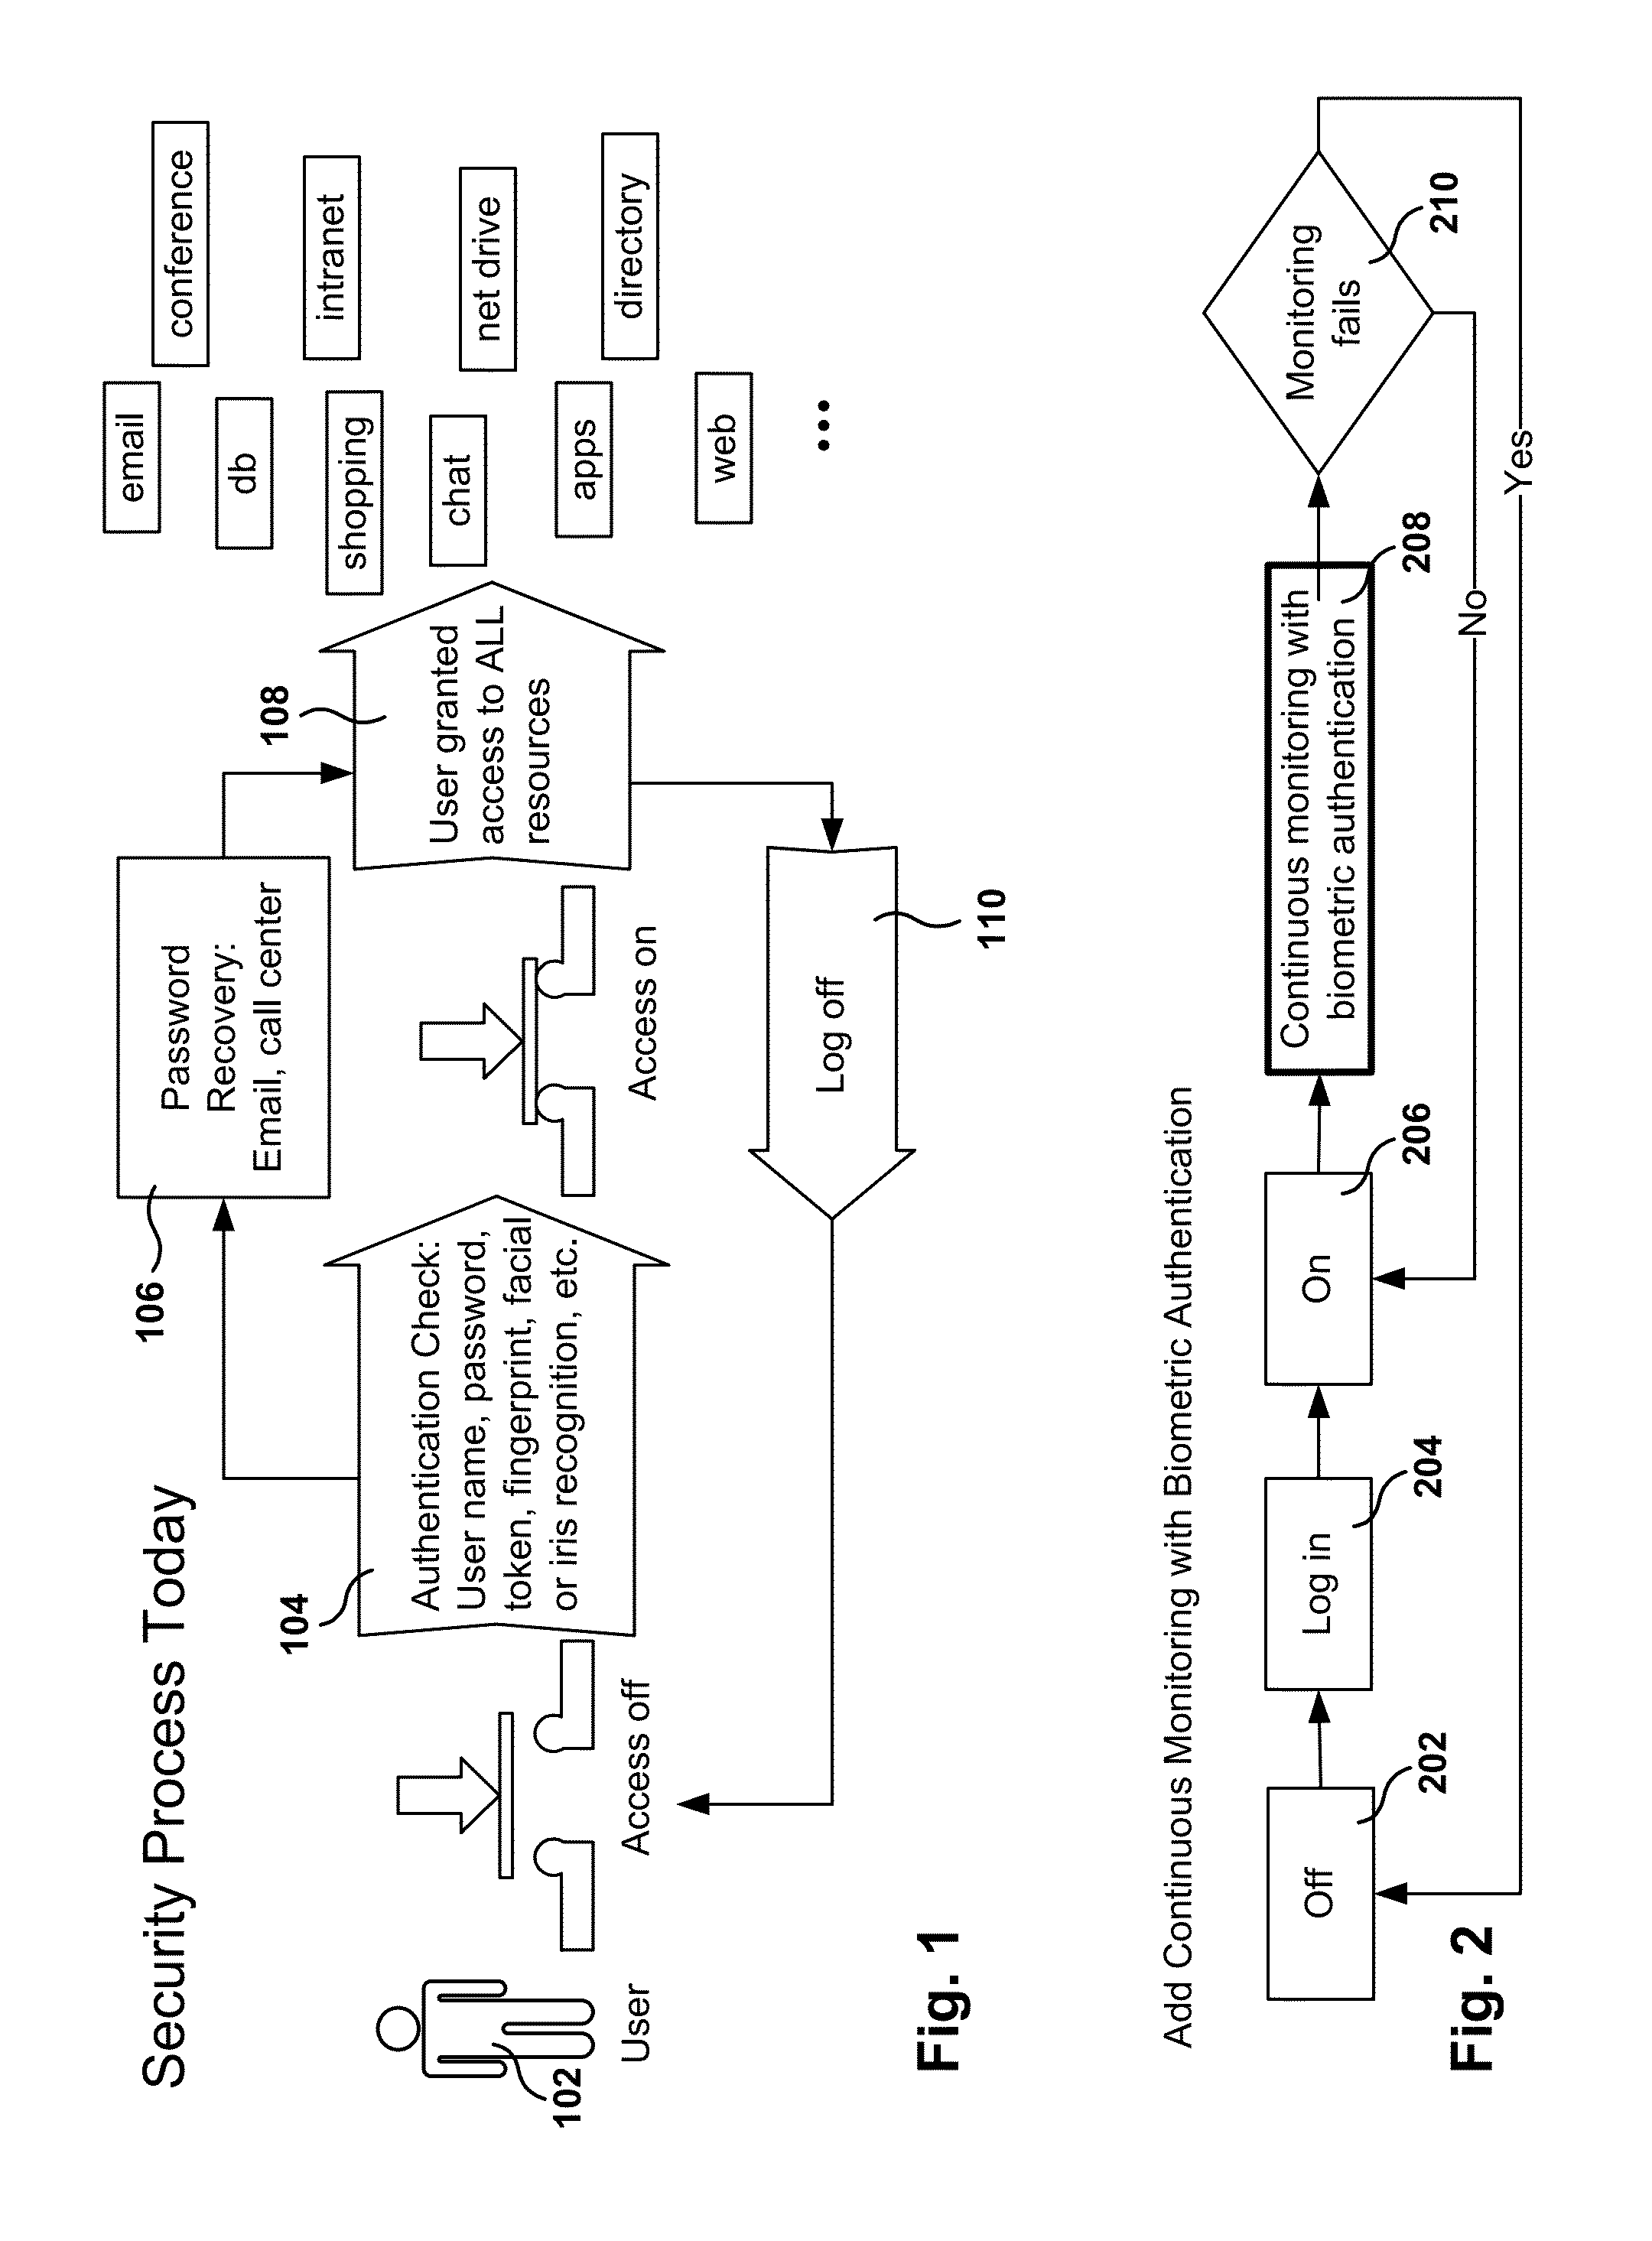 Ongoing Authentication and Access Control with Network Access Device